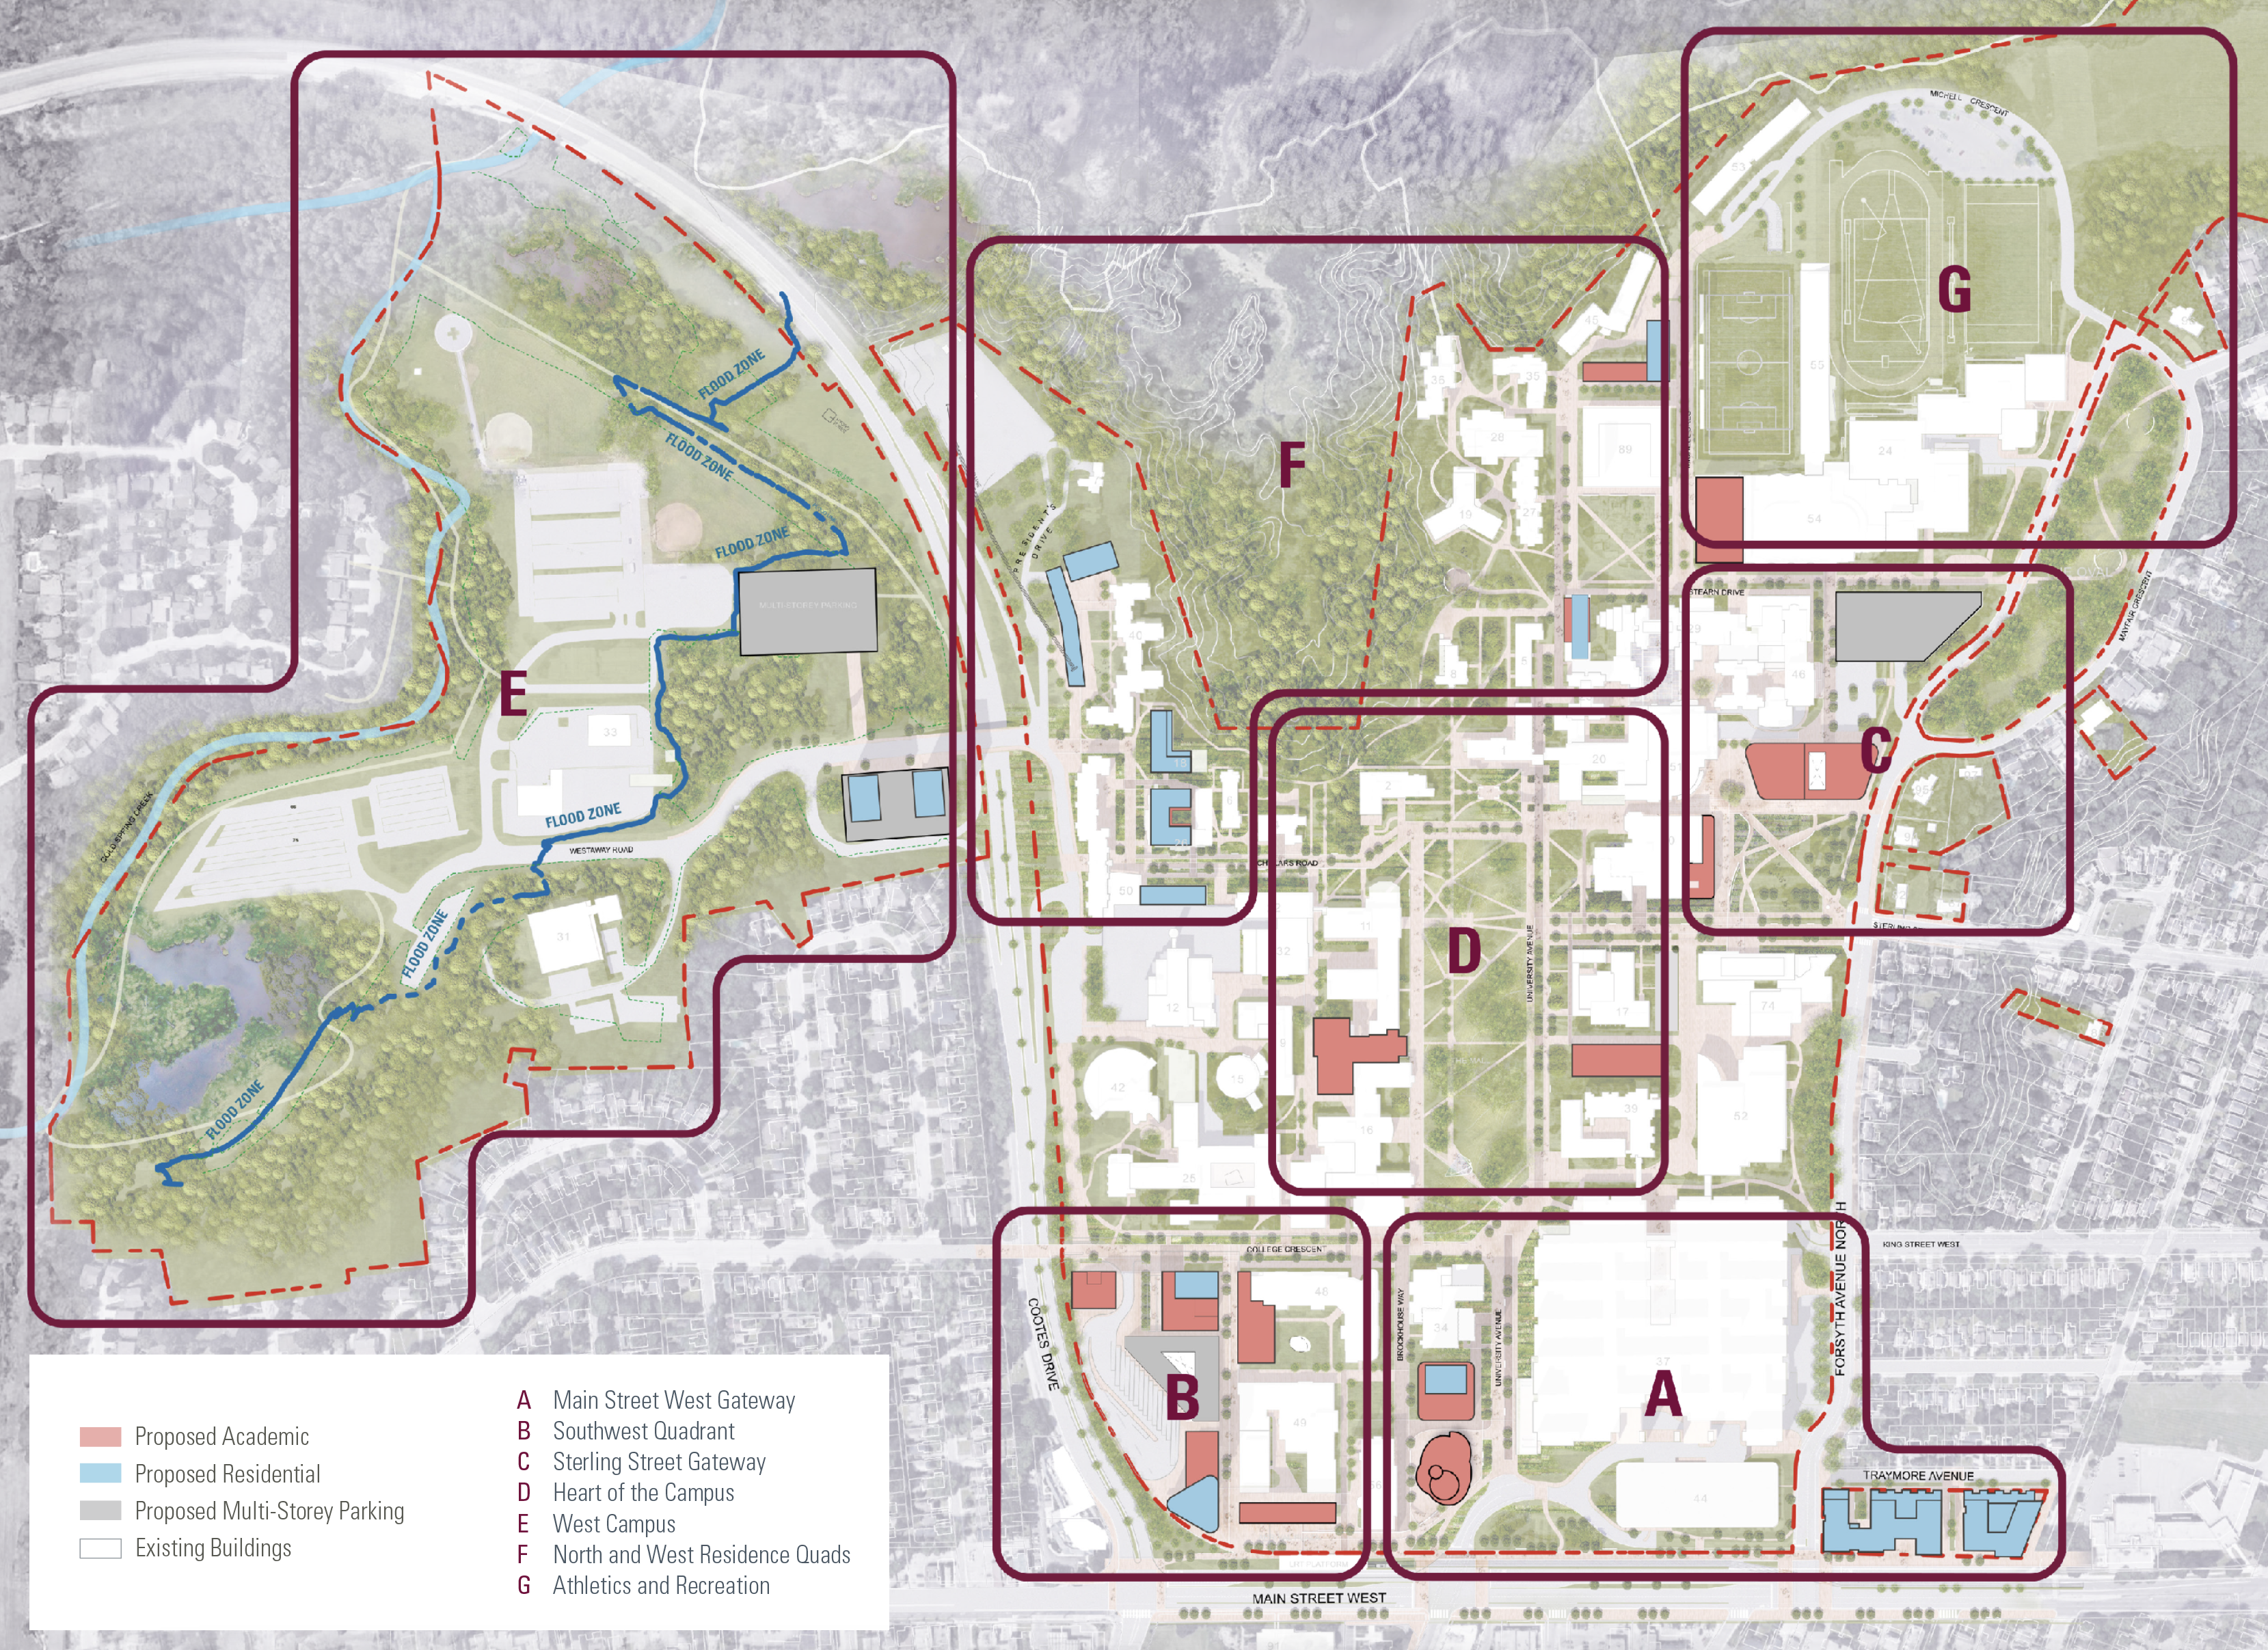 Development zones covered within the campus plan: Main Street West Gateway, Southwest Quadrant, Sterling Street Gateway, Heart of the Campus, West Campus, North and West Residence Quads, Athletics and Recreation